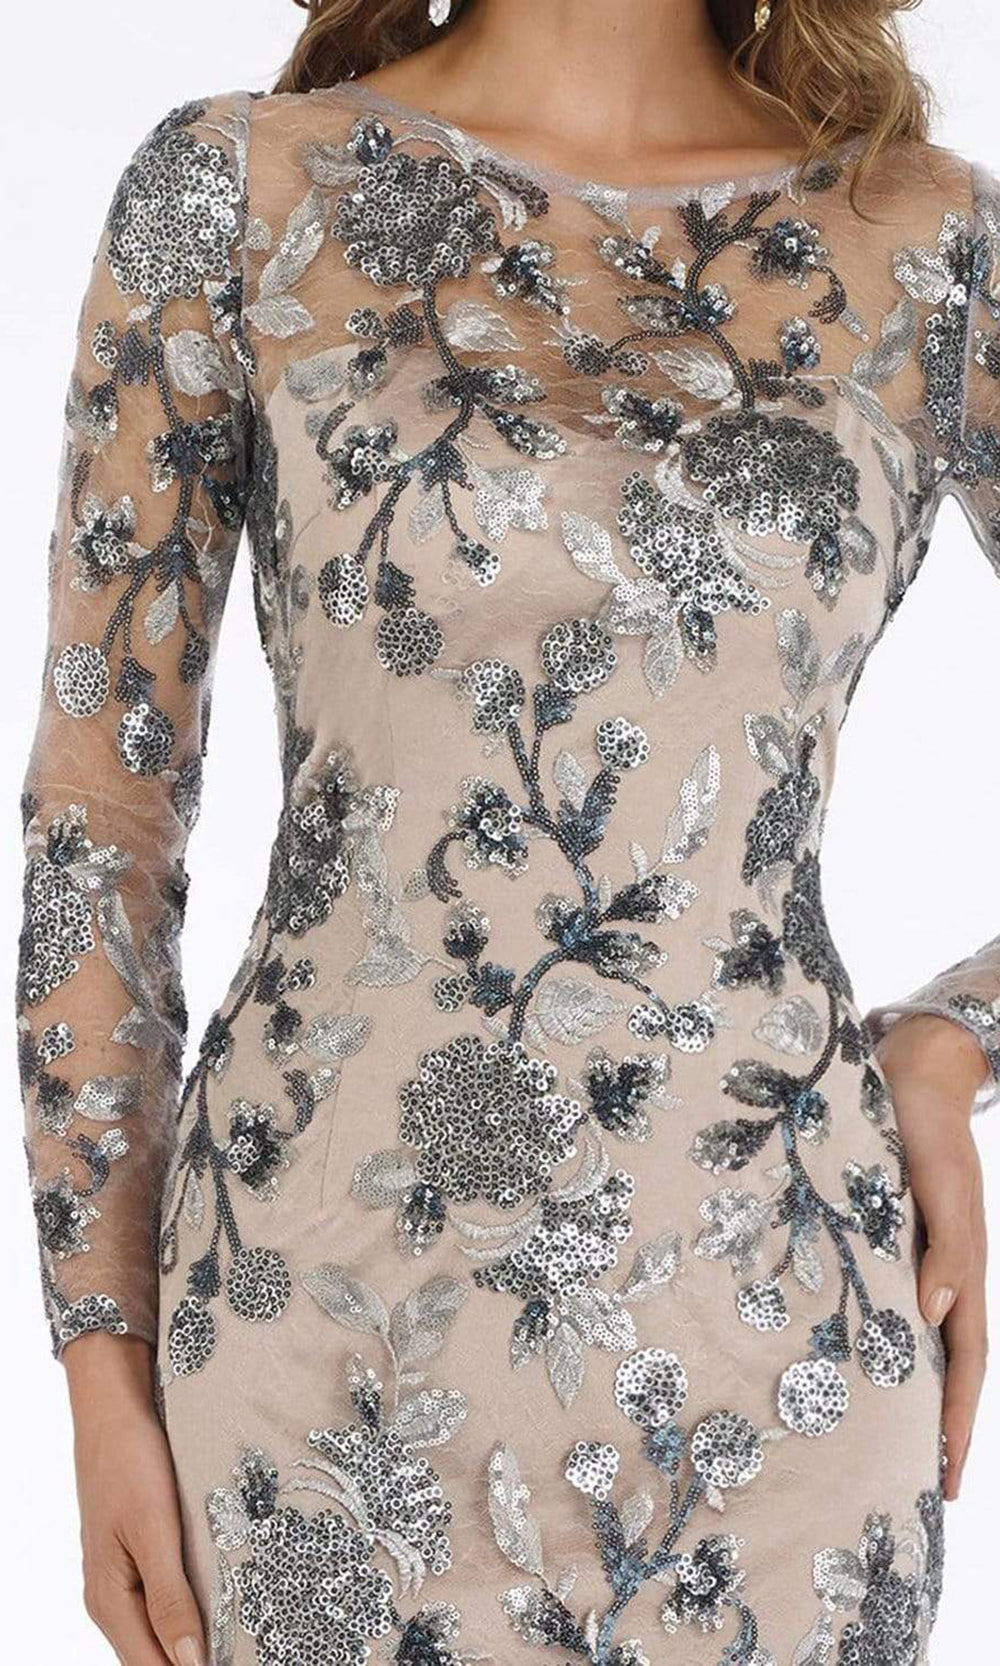 Feriani Couture - 18853 Illusion Neckline Long Sleeves Floral Sequin Embellished Dress - 1 pc Silver In Size 16 Available CCSALE 16 / Silver